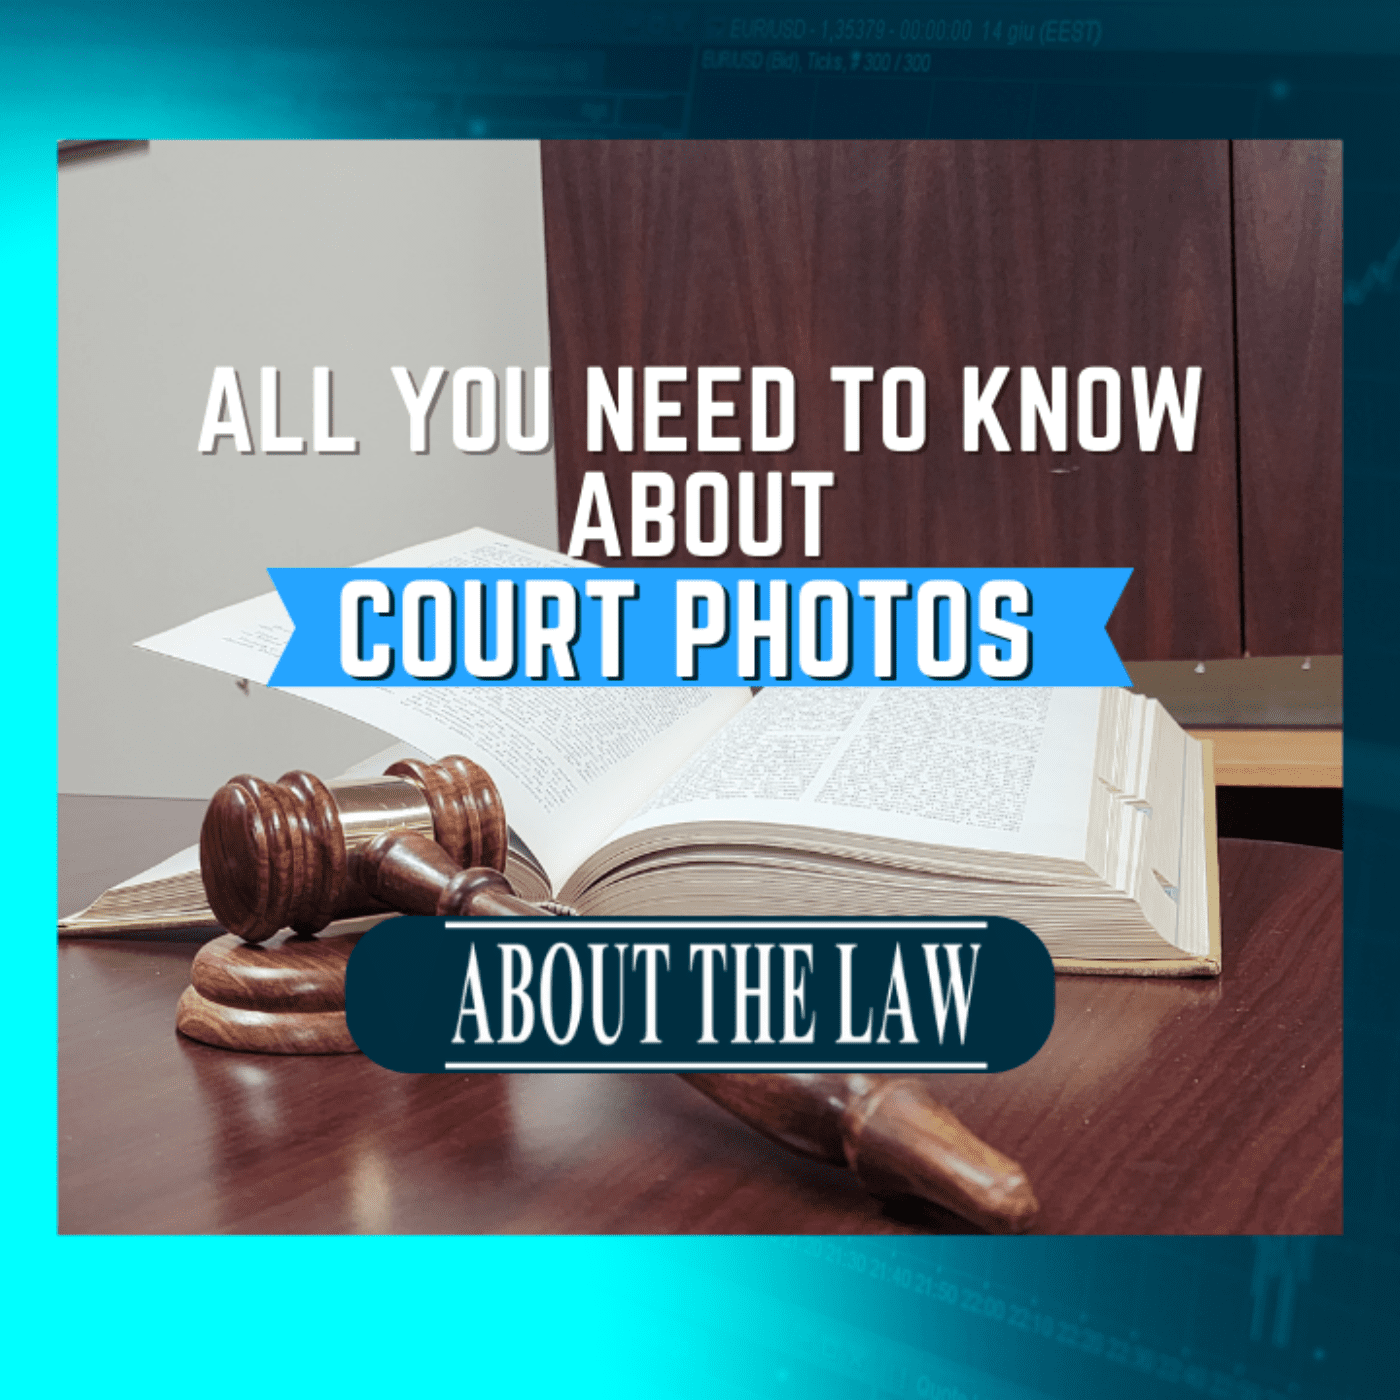 "all you need to know about court photos" over a book and gavel